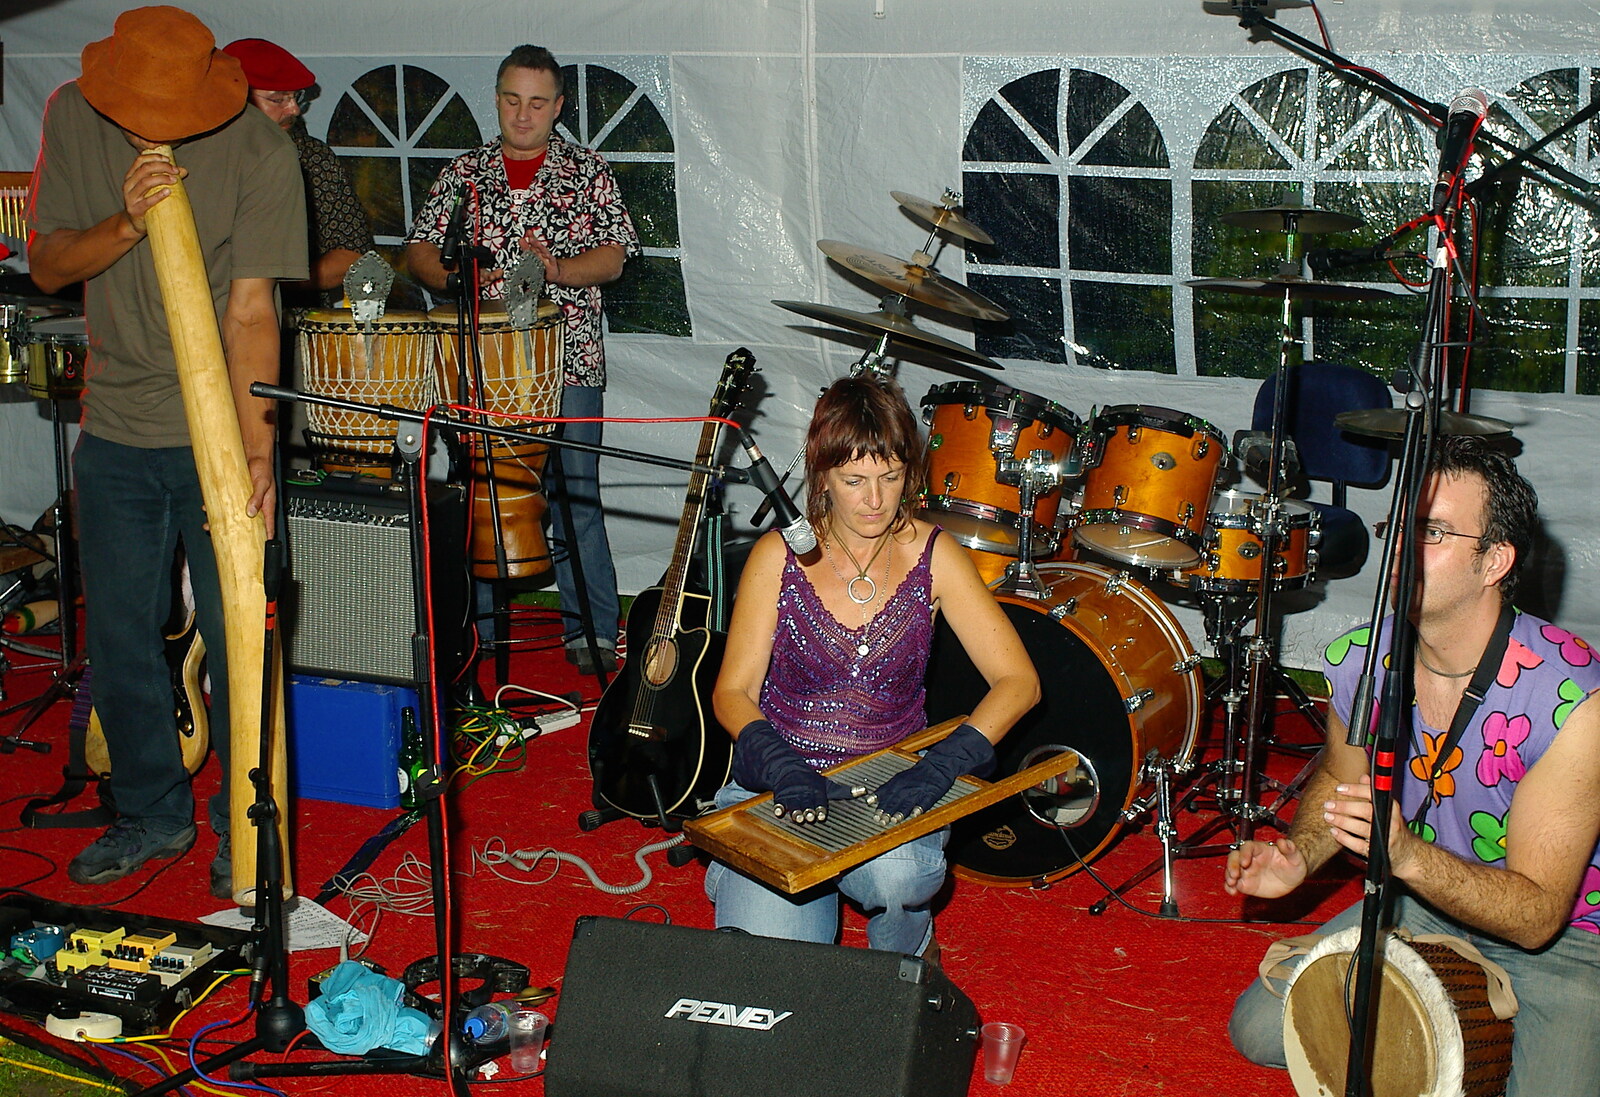 Jo and Steph's Party, Burston, Norfolk - 30th September 2005: The band gets all percussive